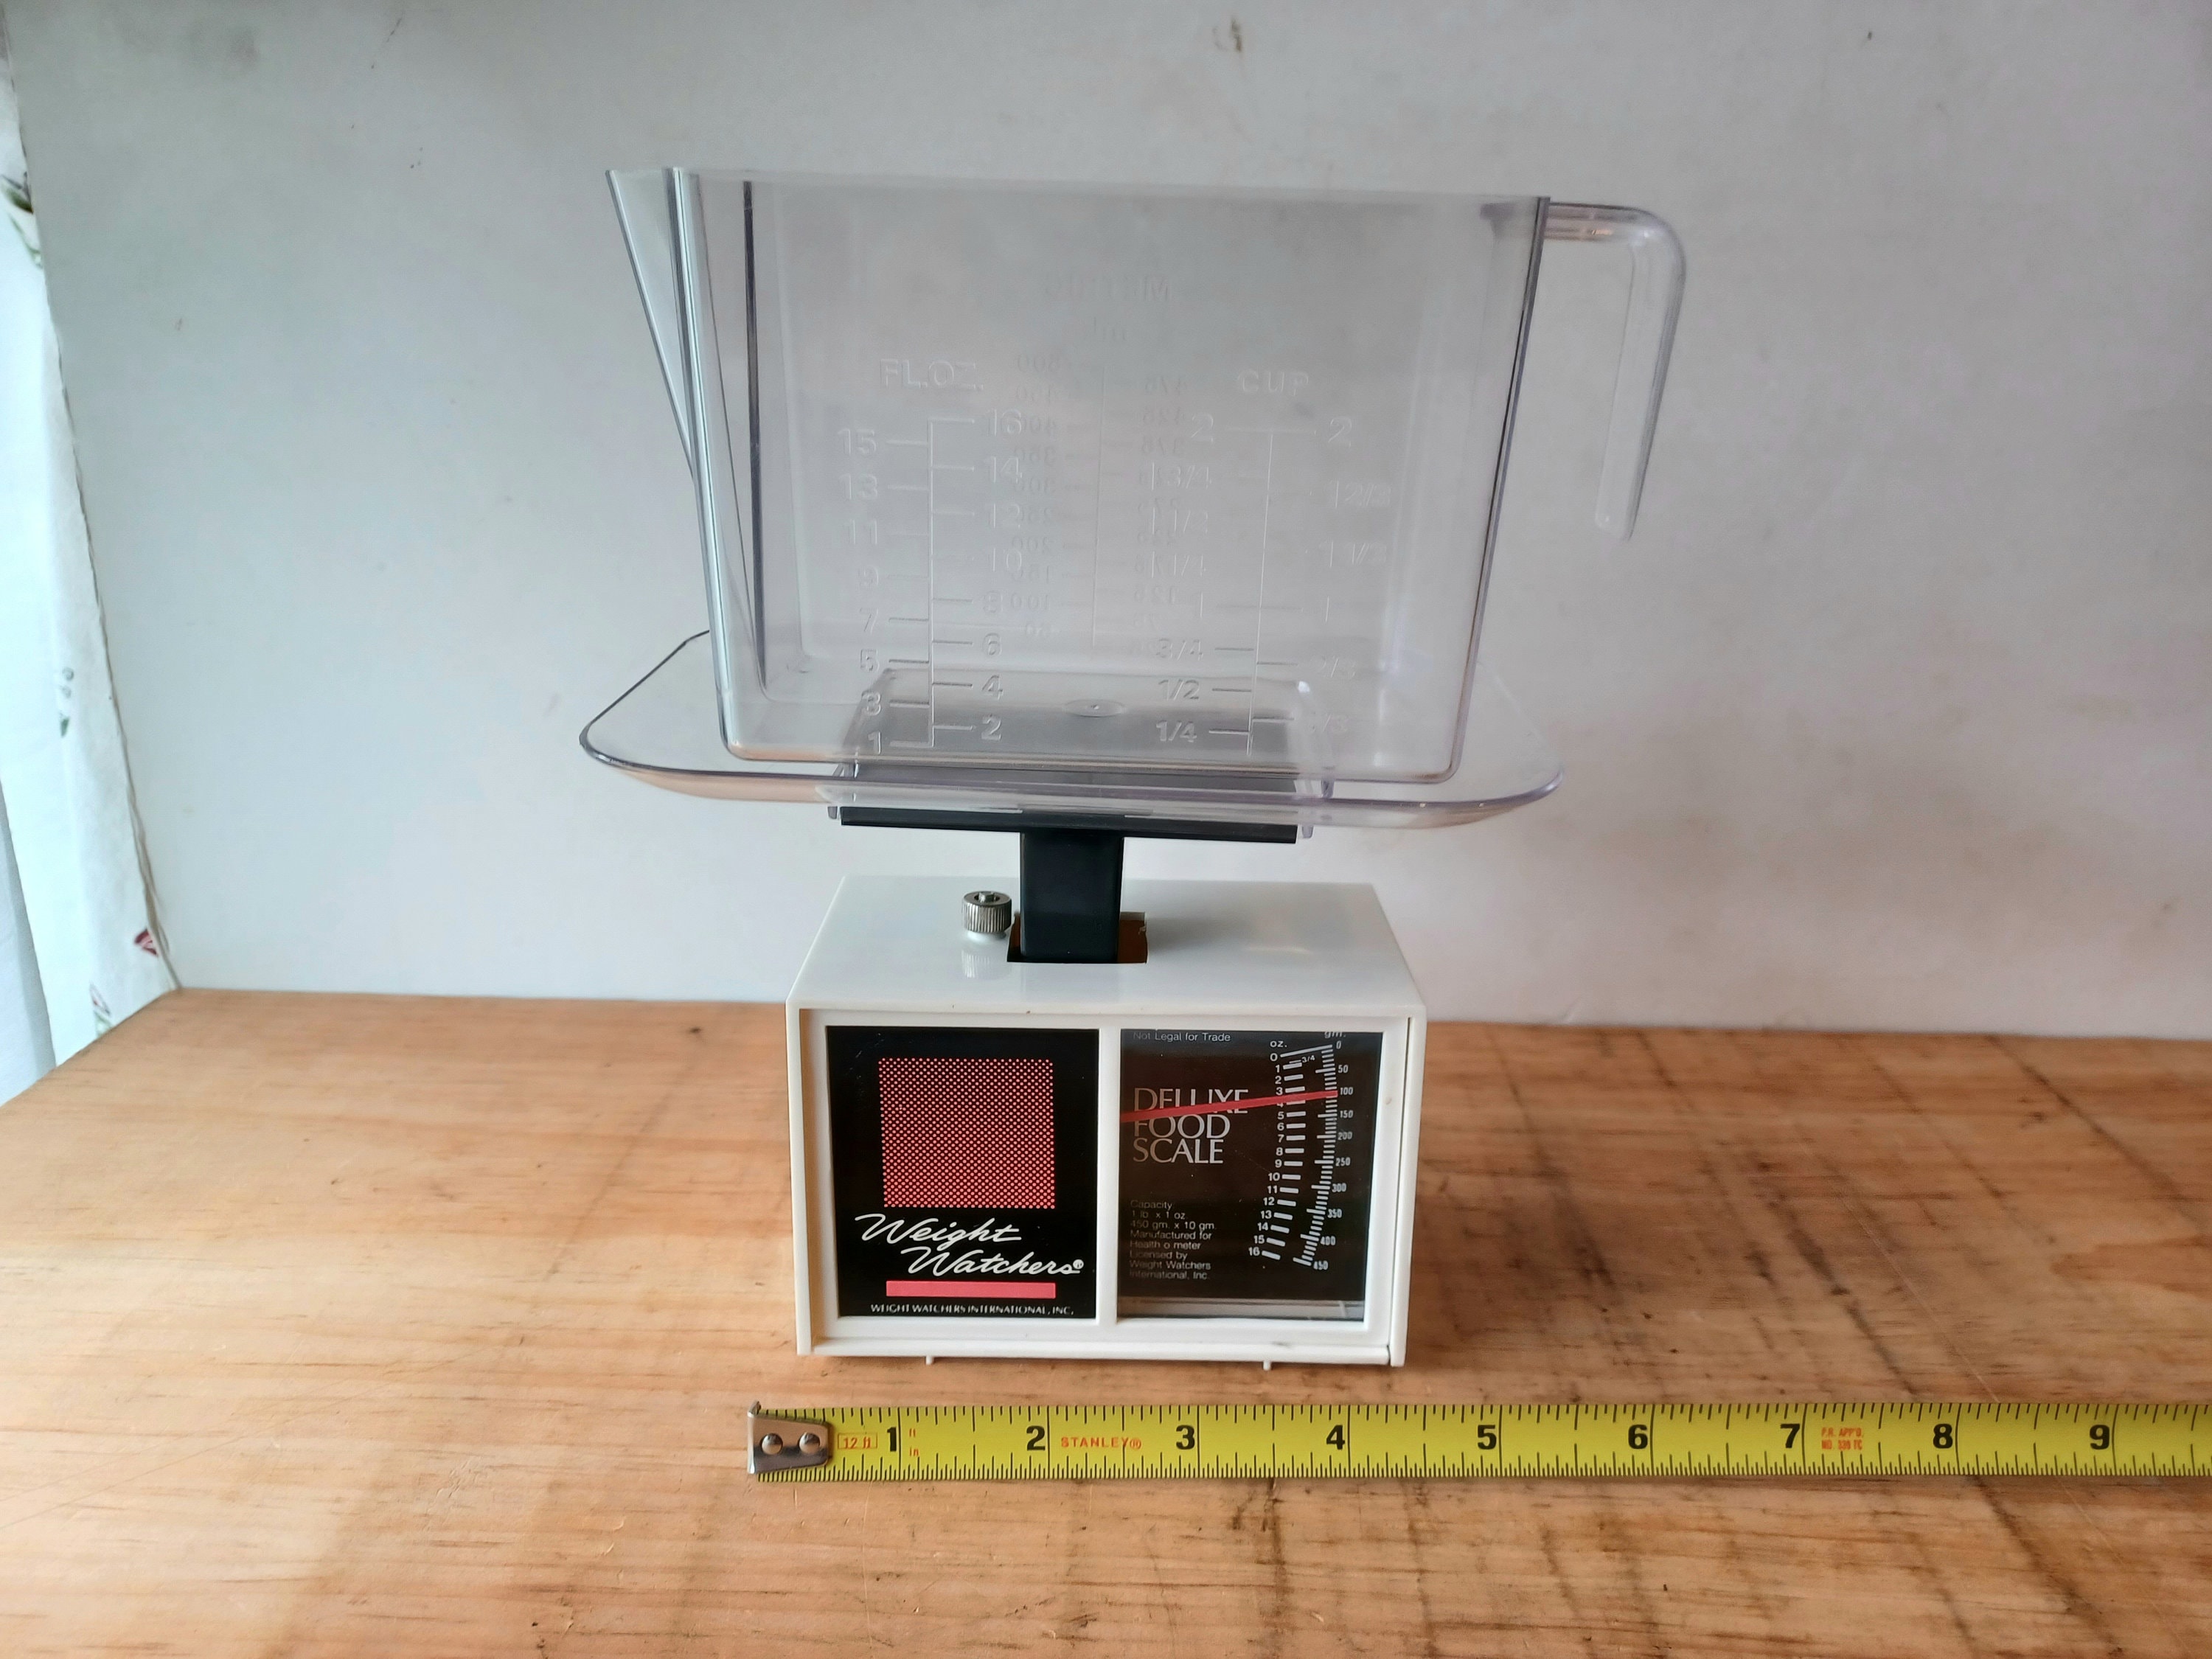 Vintage Weight Watchers Food Scale 1980s 